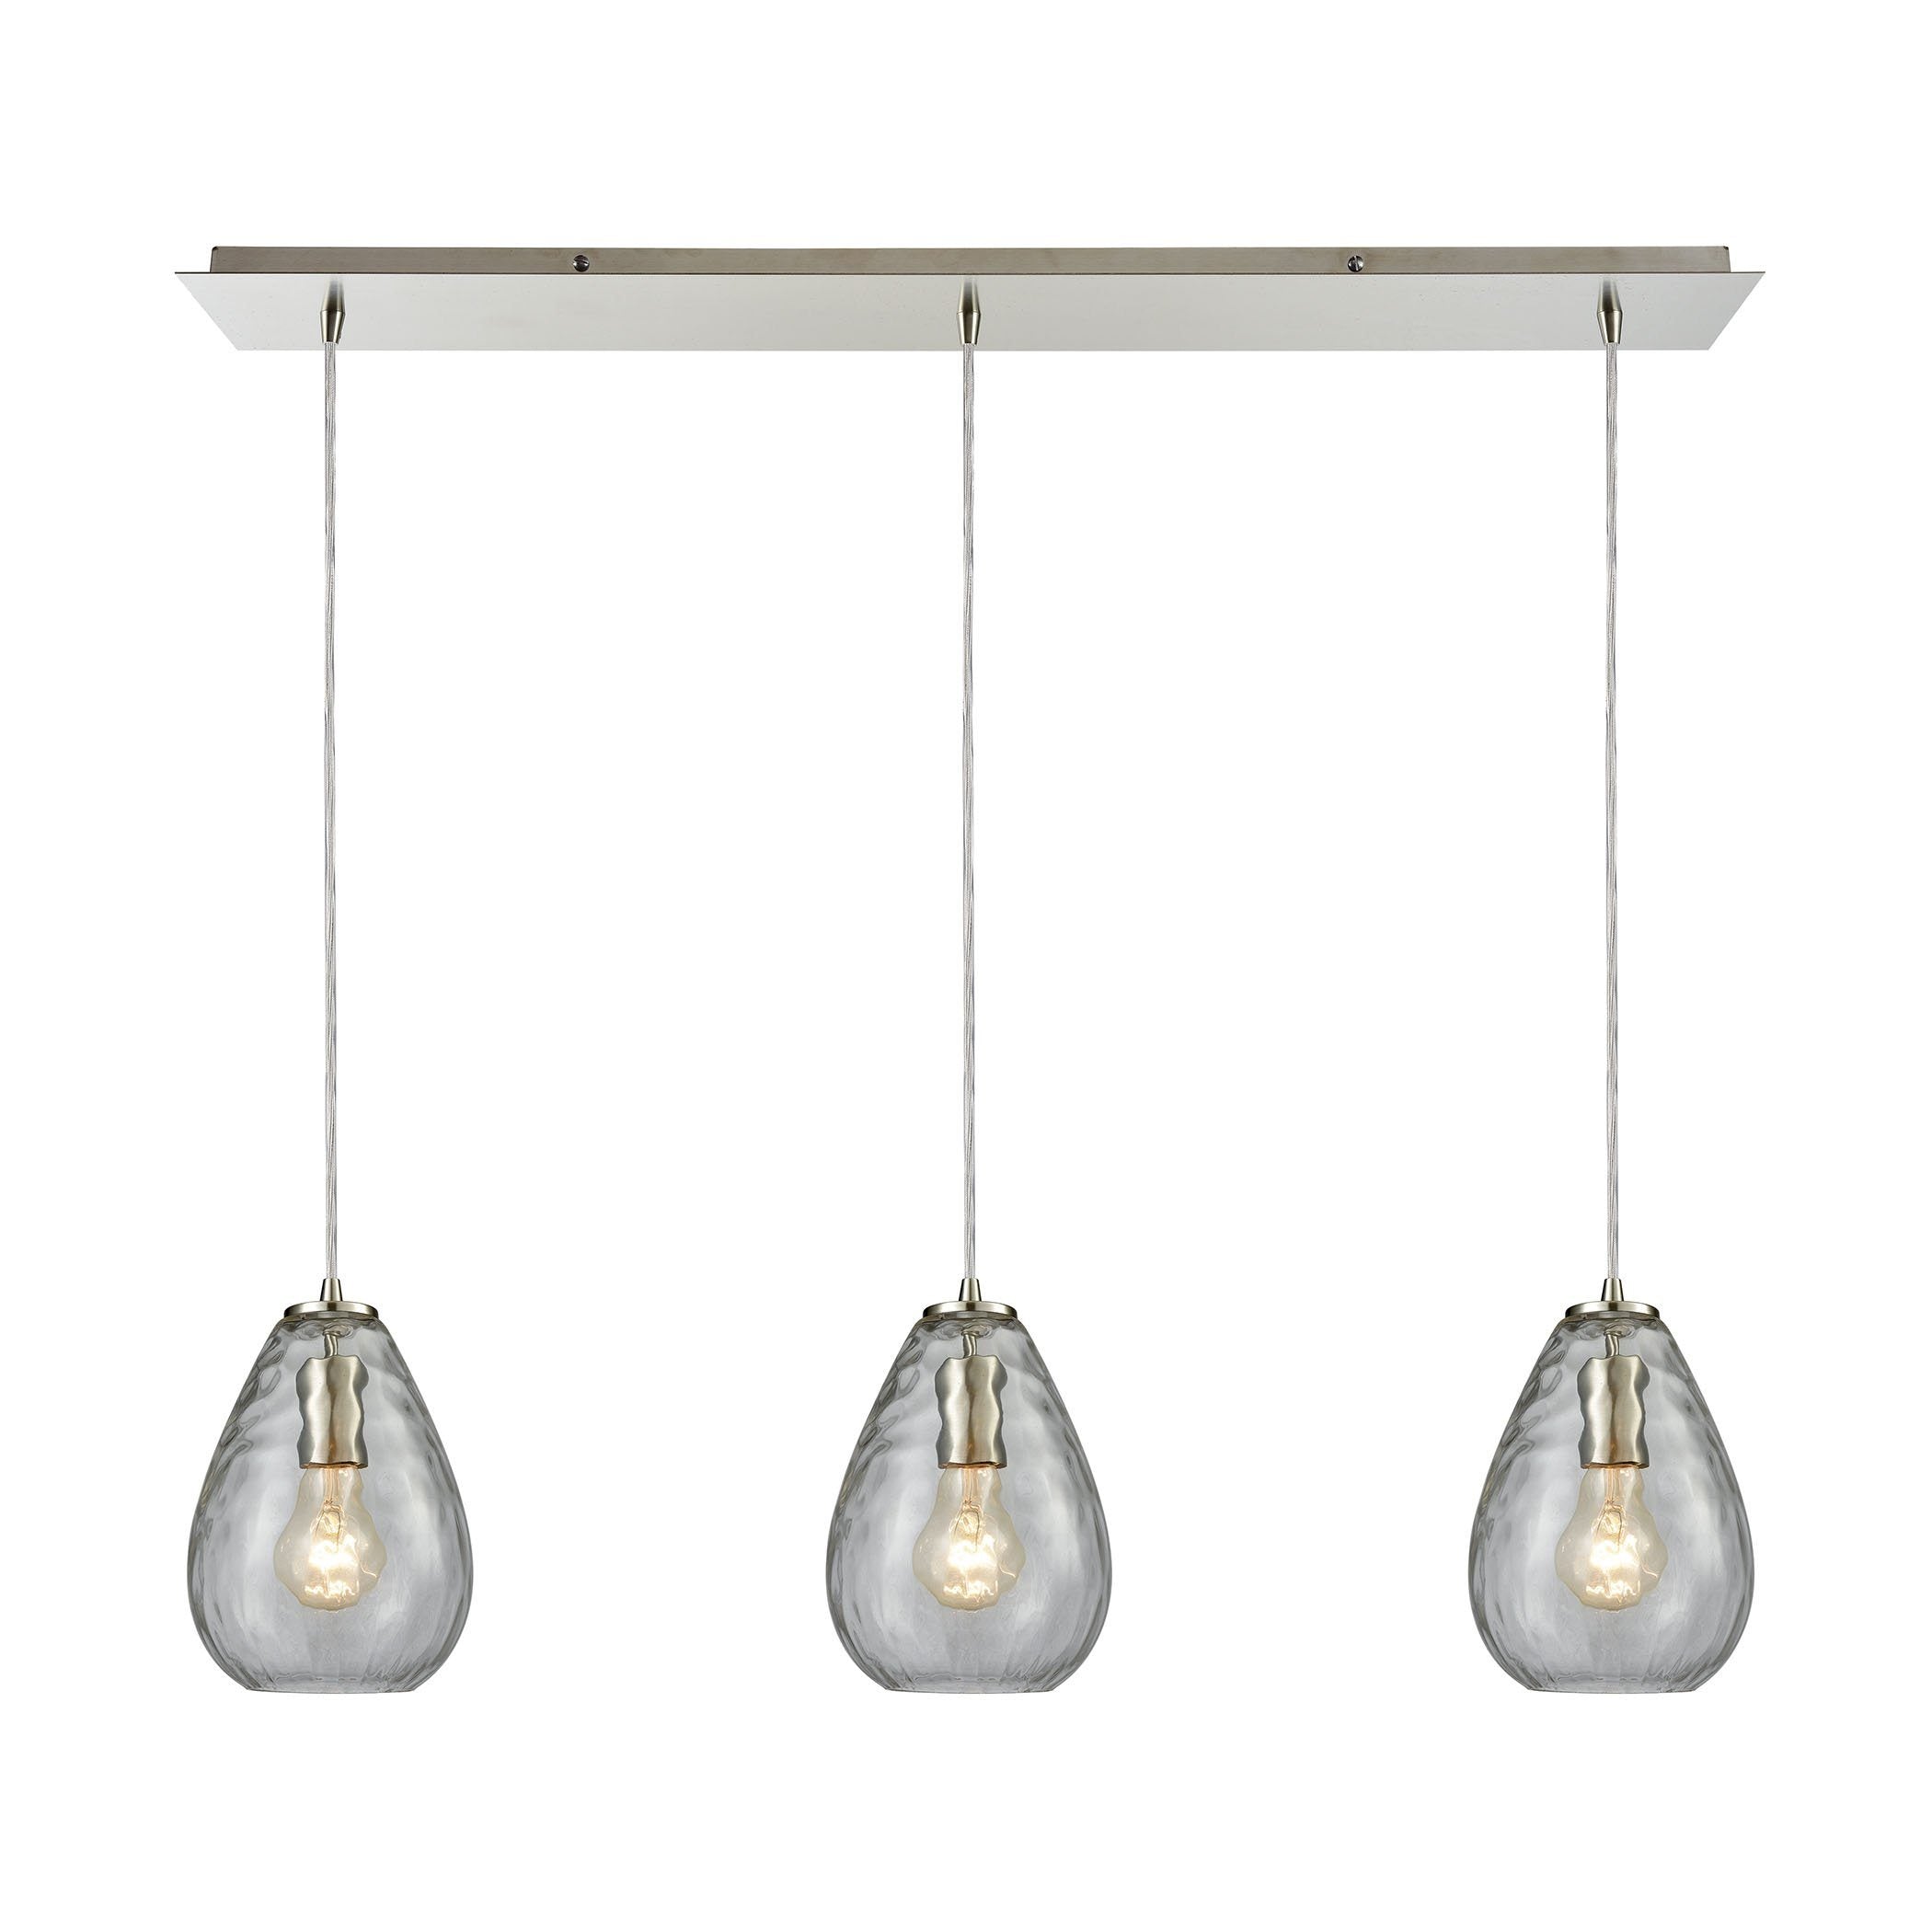 Lagoon 3-Light Linear Pan In Satin Nickel With Clear Water Glass Pendant Ceiling Elk Lighting 